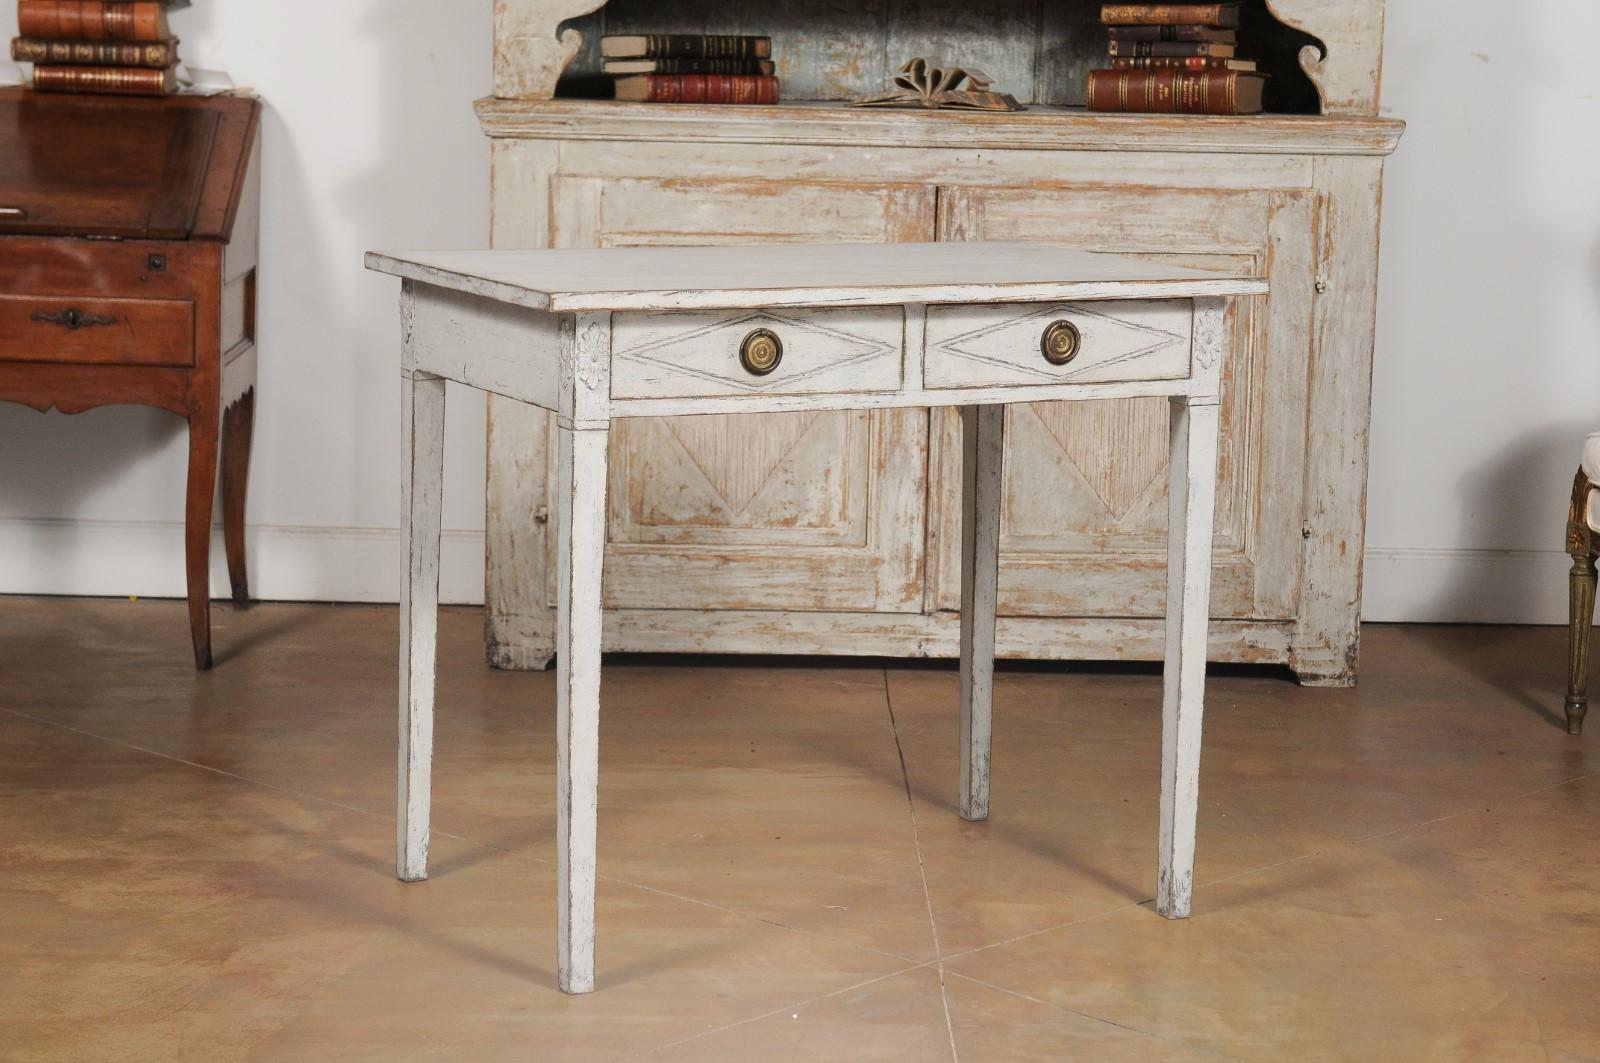 Swedish Gustavian Style Painted Wood Desk with Two Drawers and Diamond Motifs 1